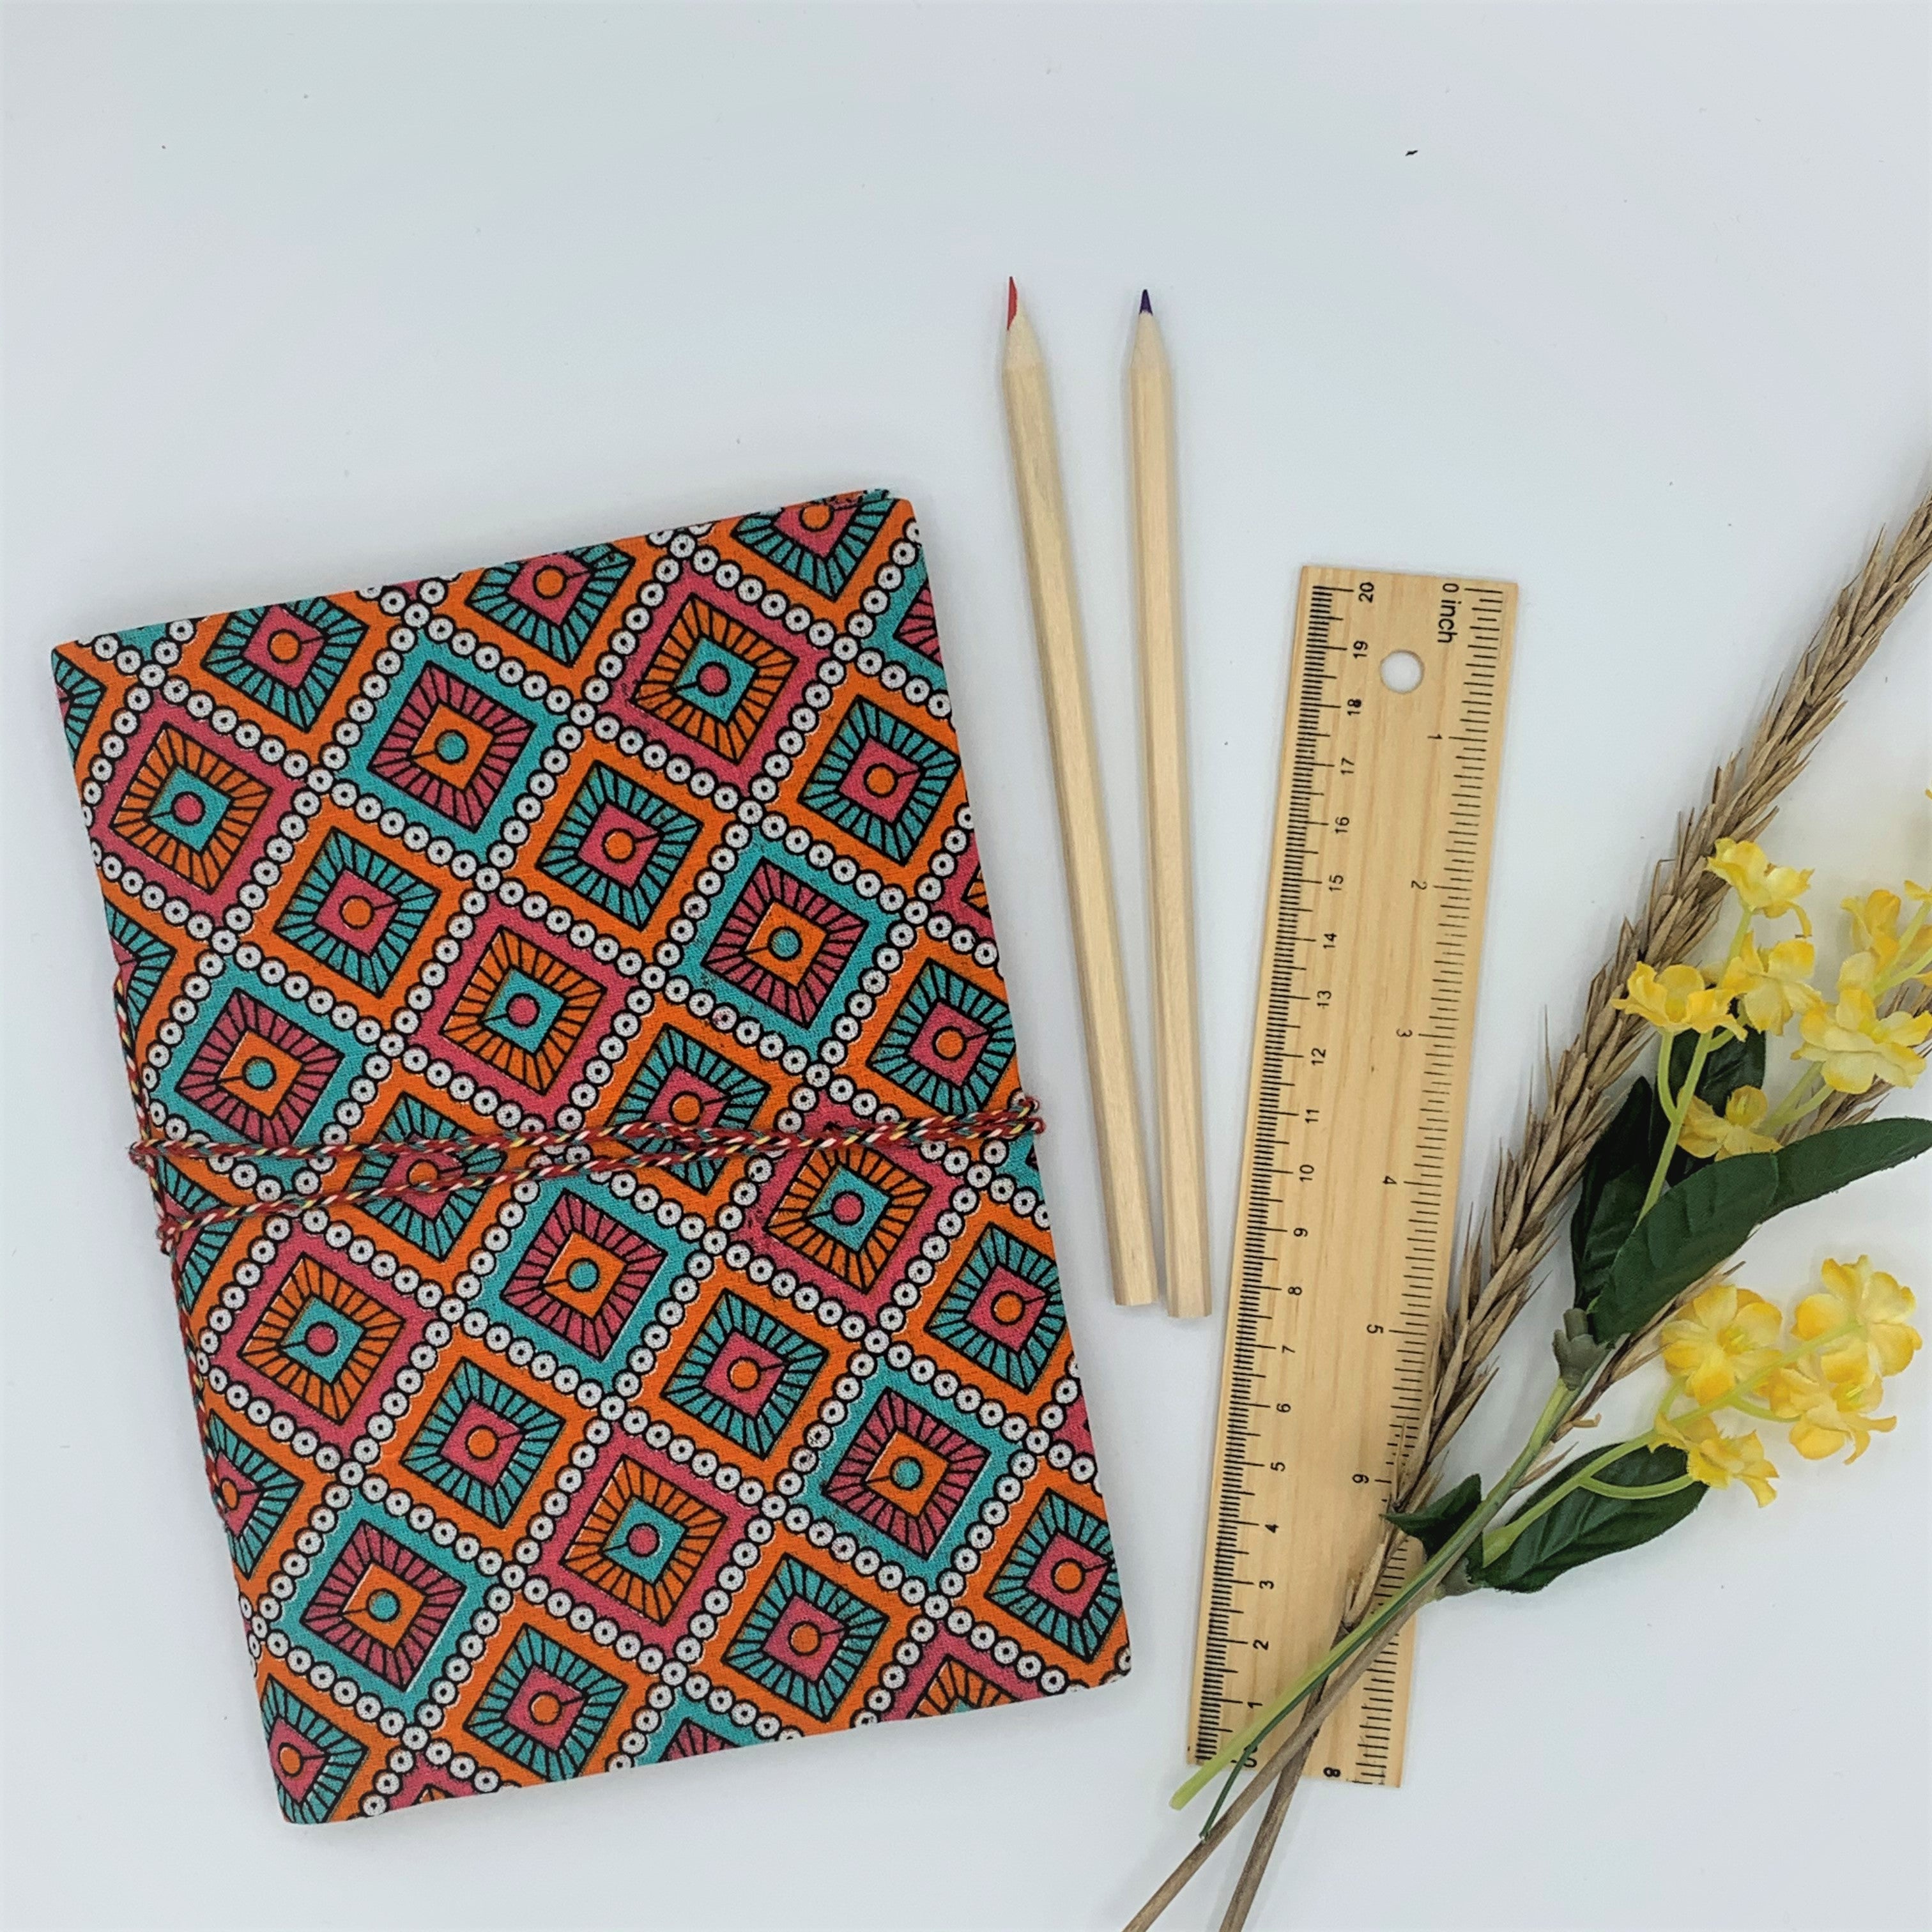 Handmade Journals for Kids and Adults : Orange